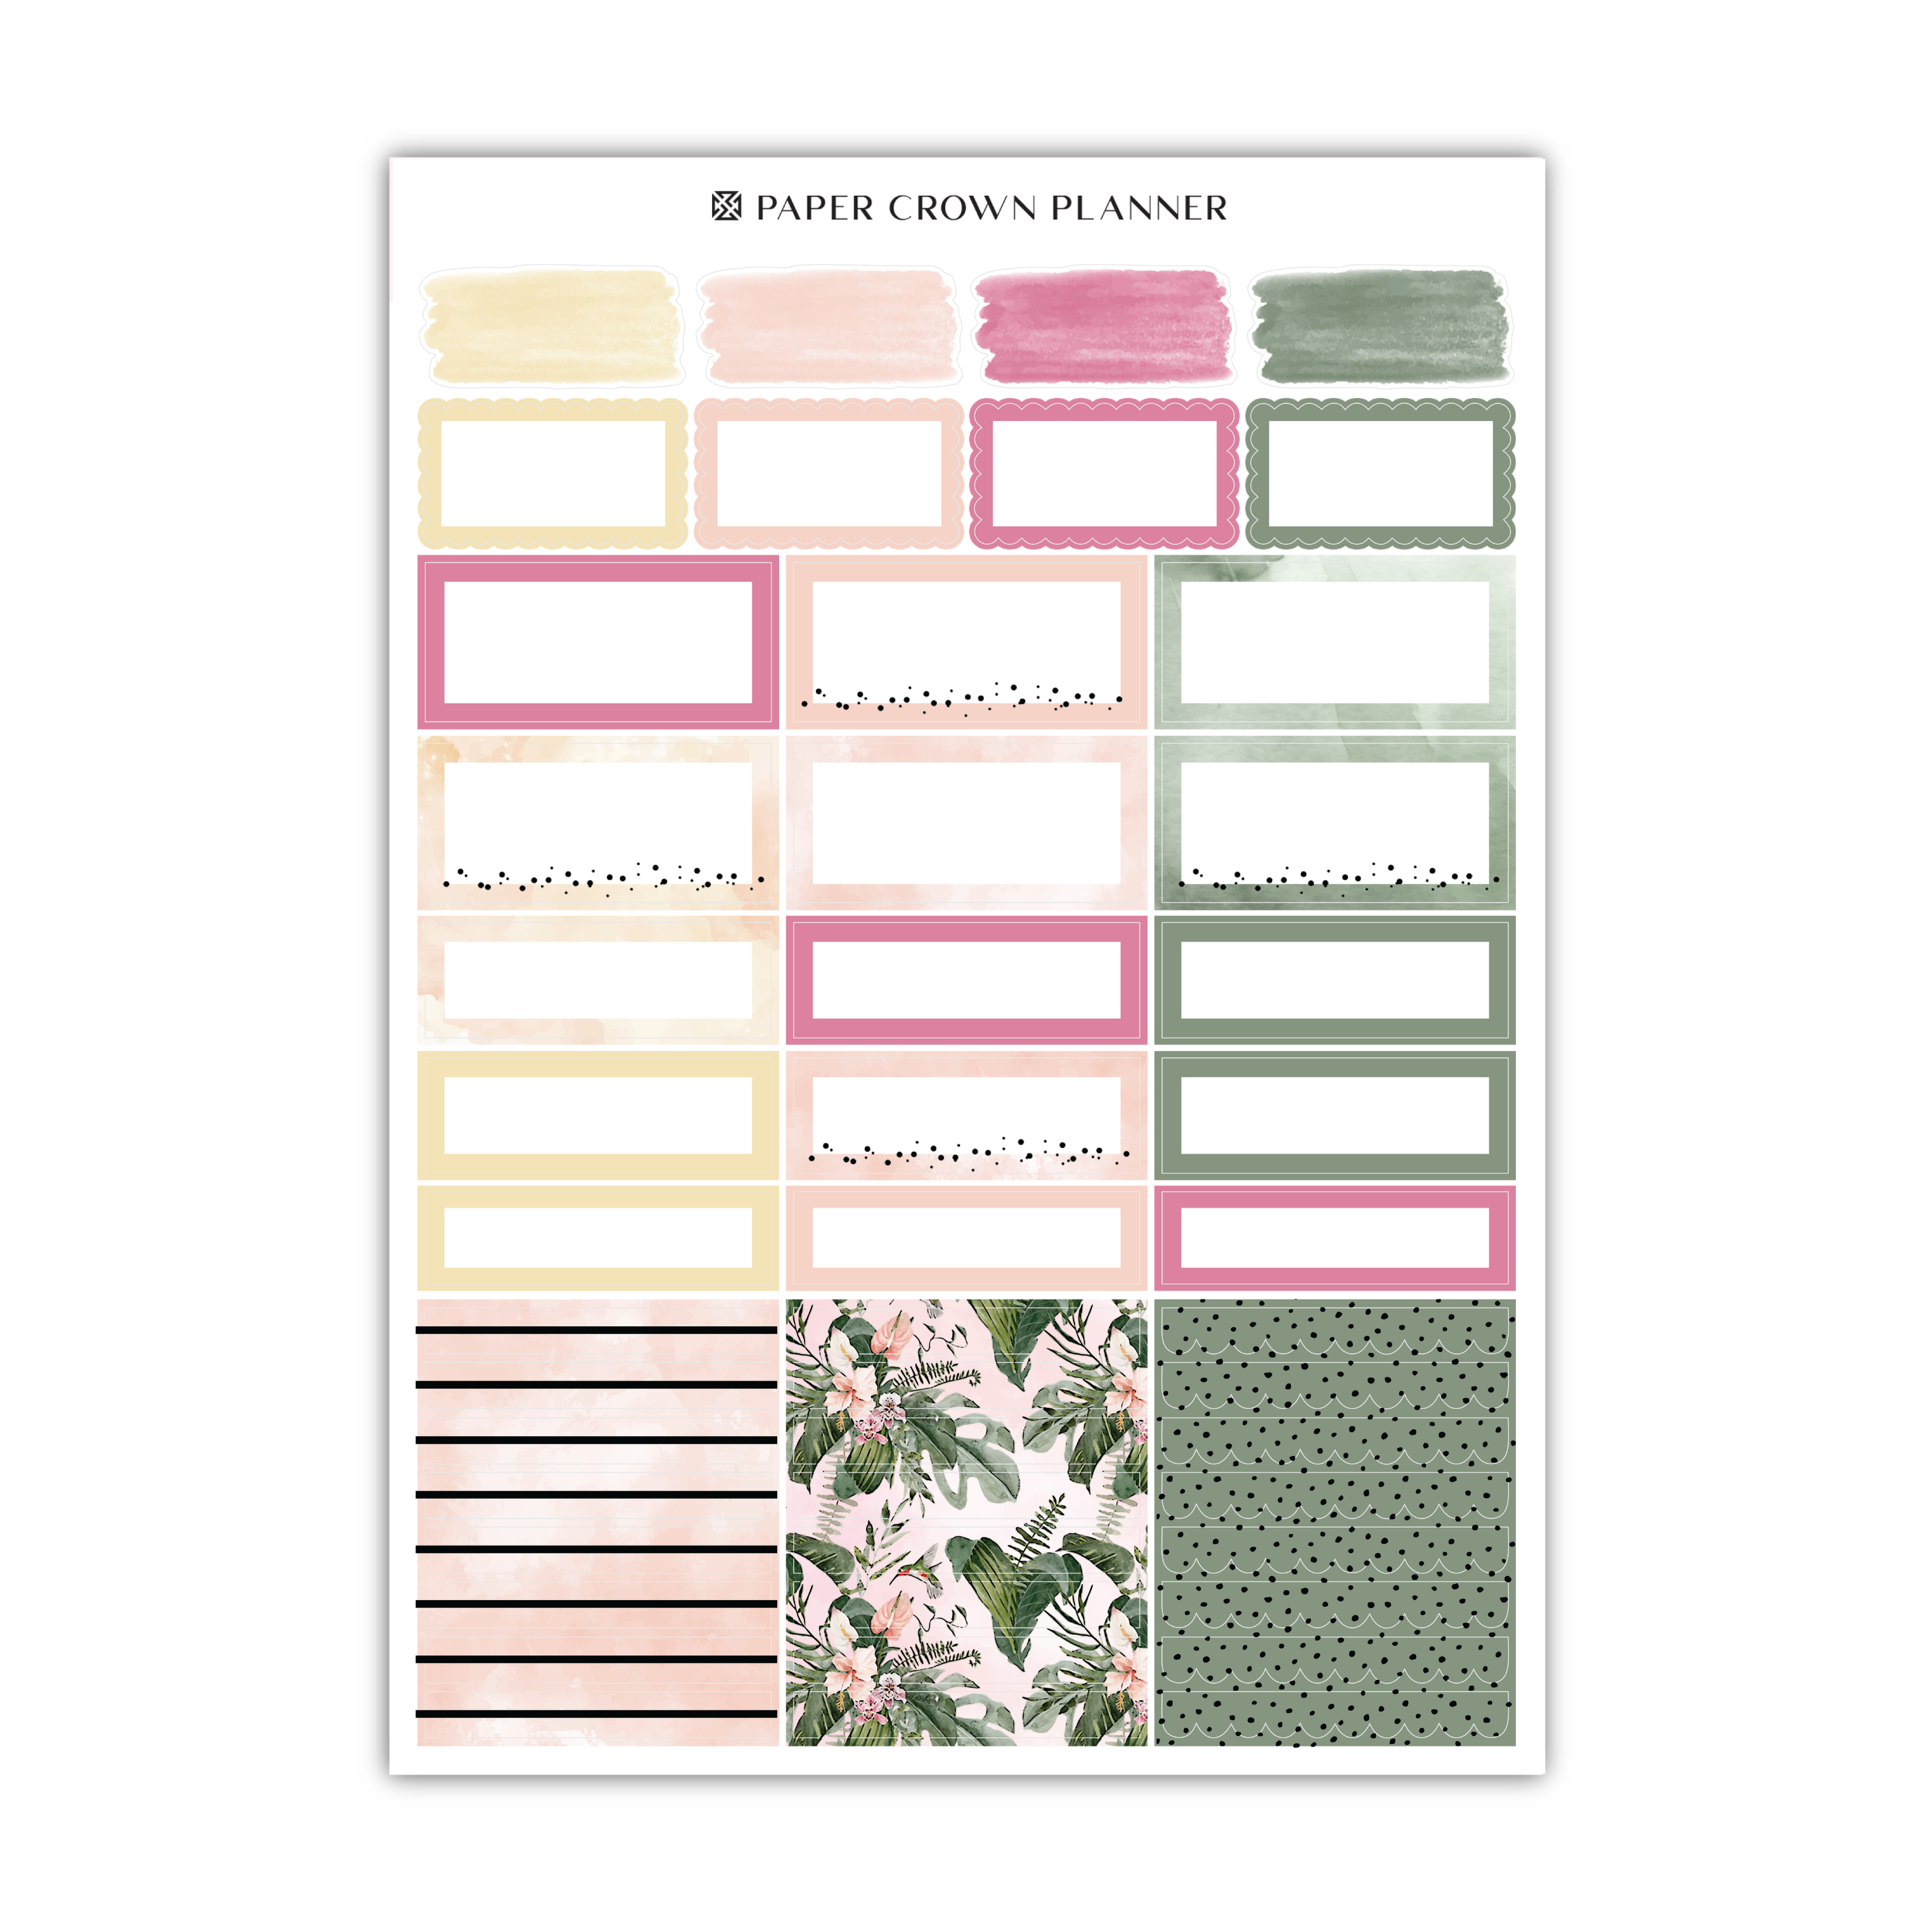 a printable planner with pink and green flowers